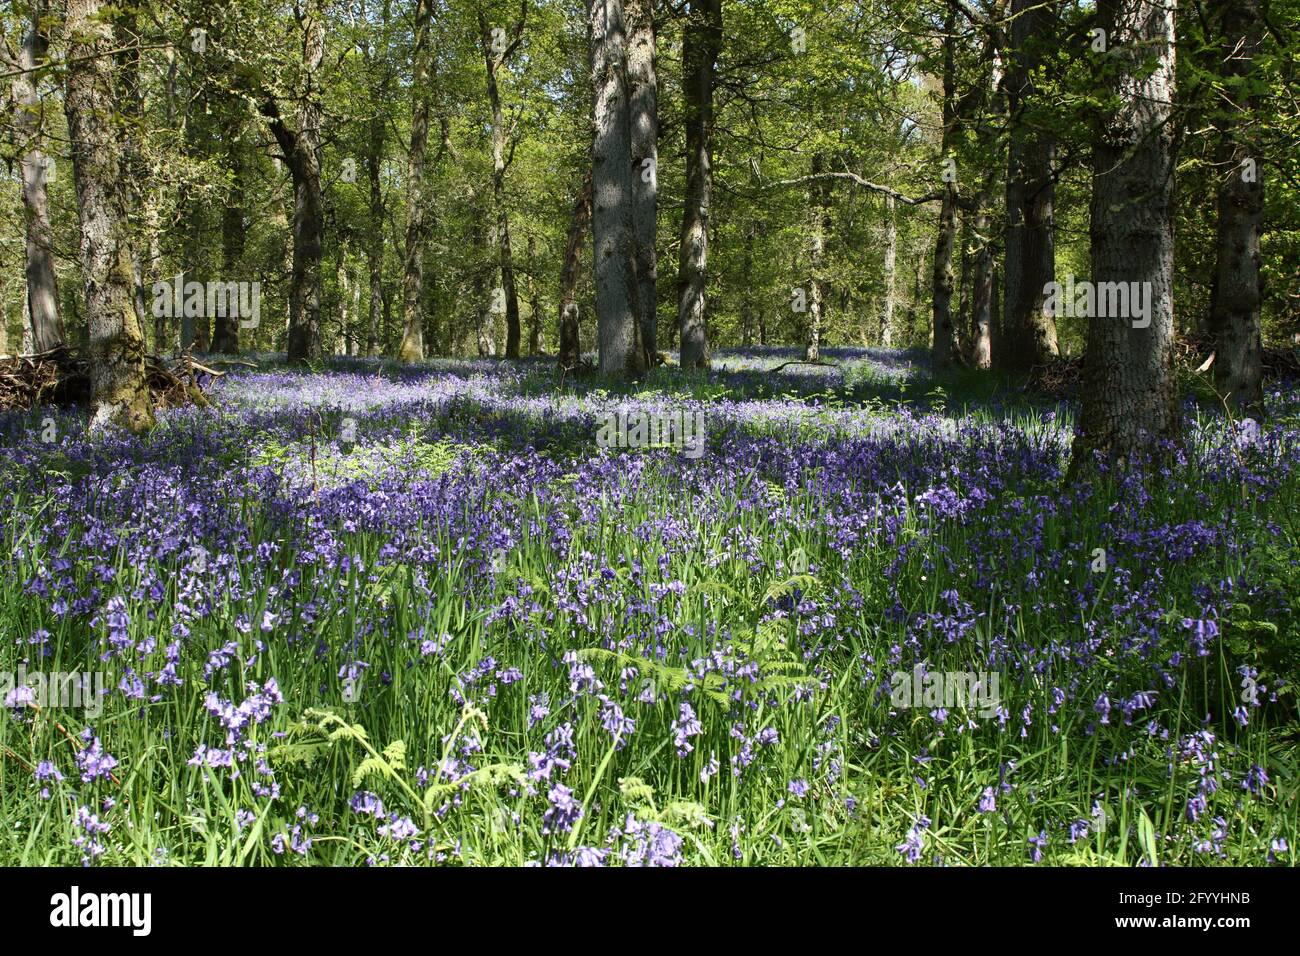 Peaceful mindfulness location, in a mature countryside Woodland in springtime, ground cover of Bluebells among the trees, nature calming mental stress Stock Photo